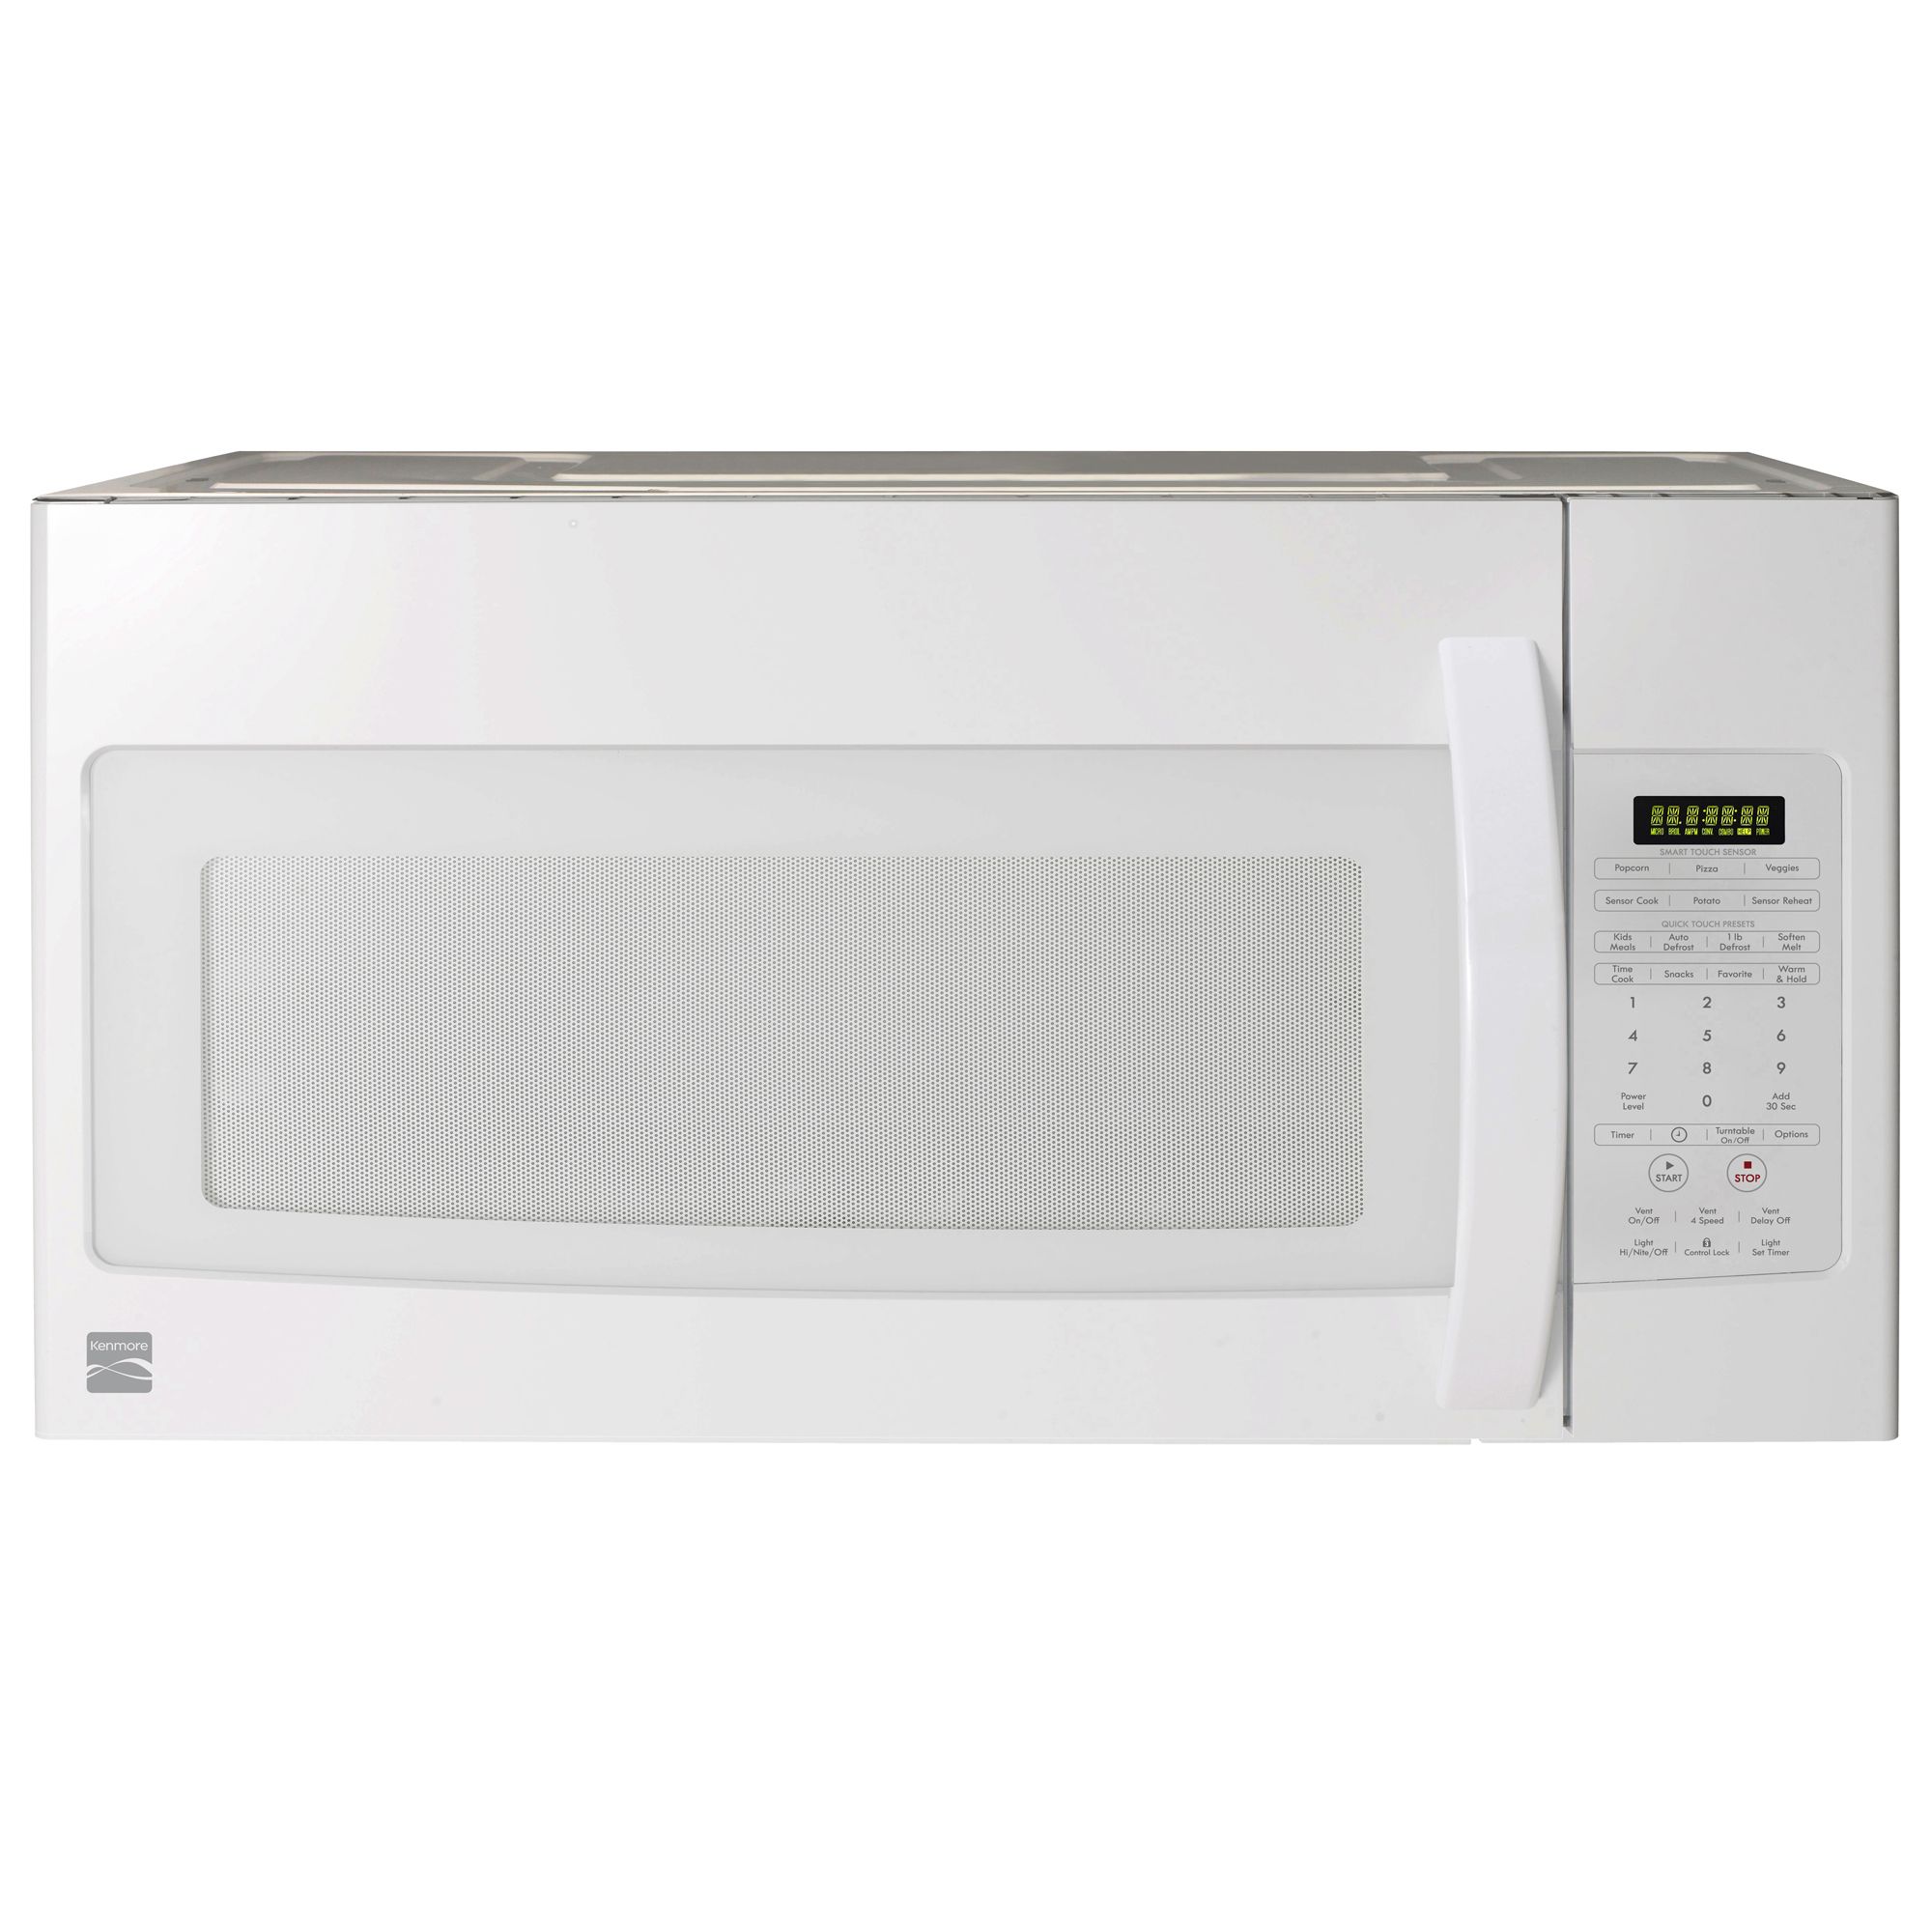 Kenmore Over the Range Microwave 1.9 cu. ft. 85052 - Sears